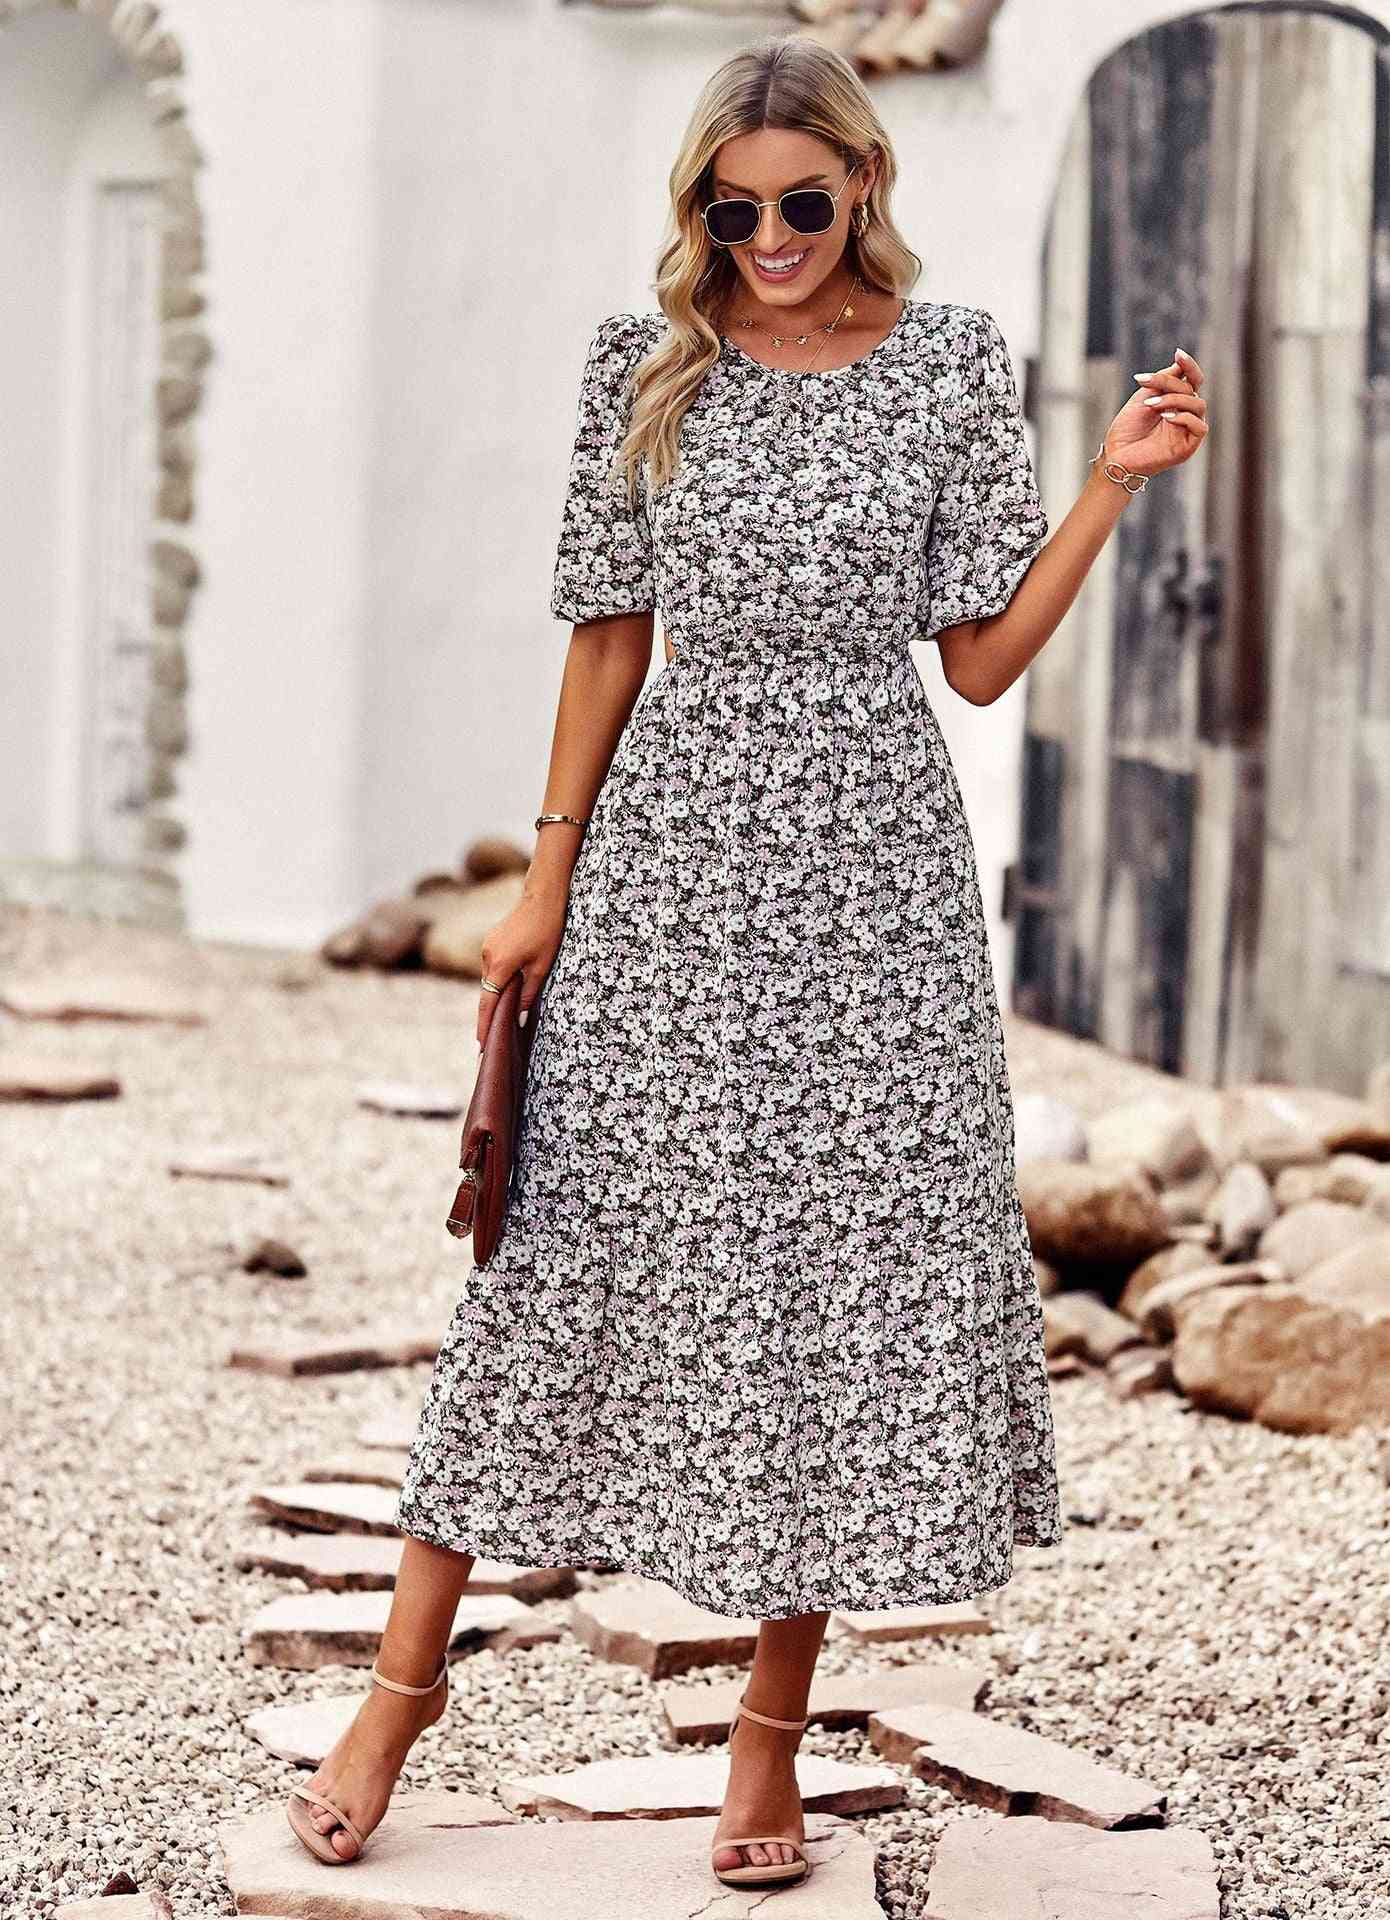 Fashion Round Neck Printed Dress - Trotters Independent Traders